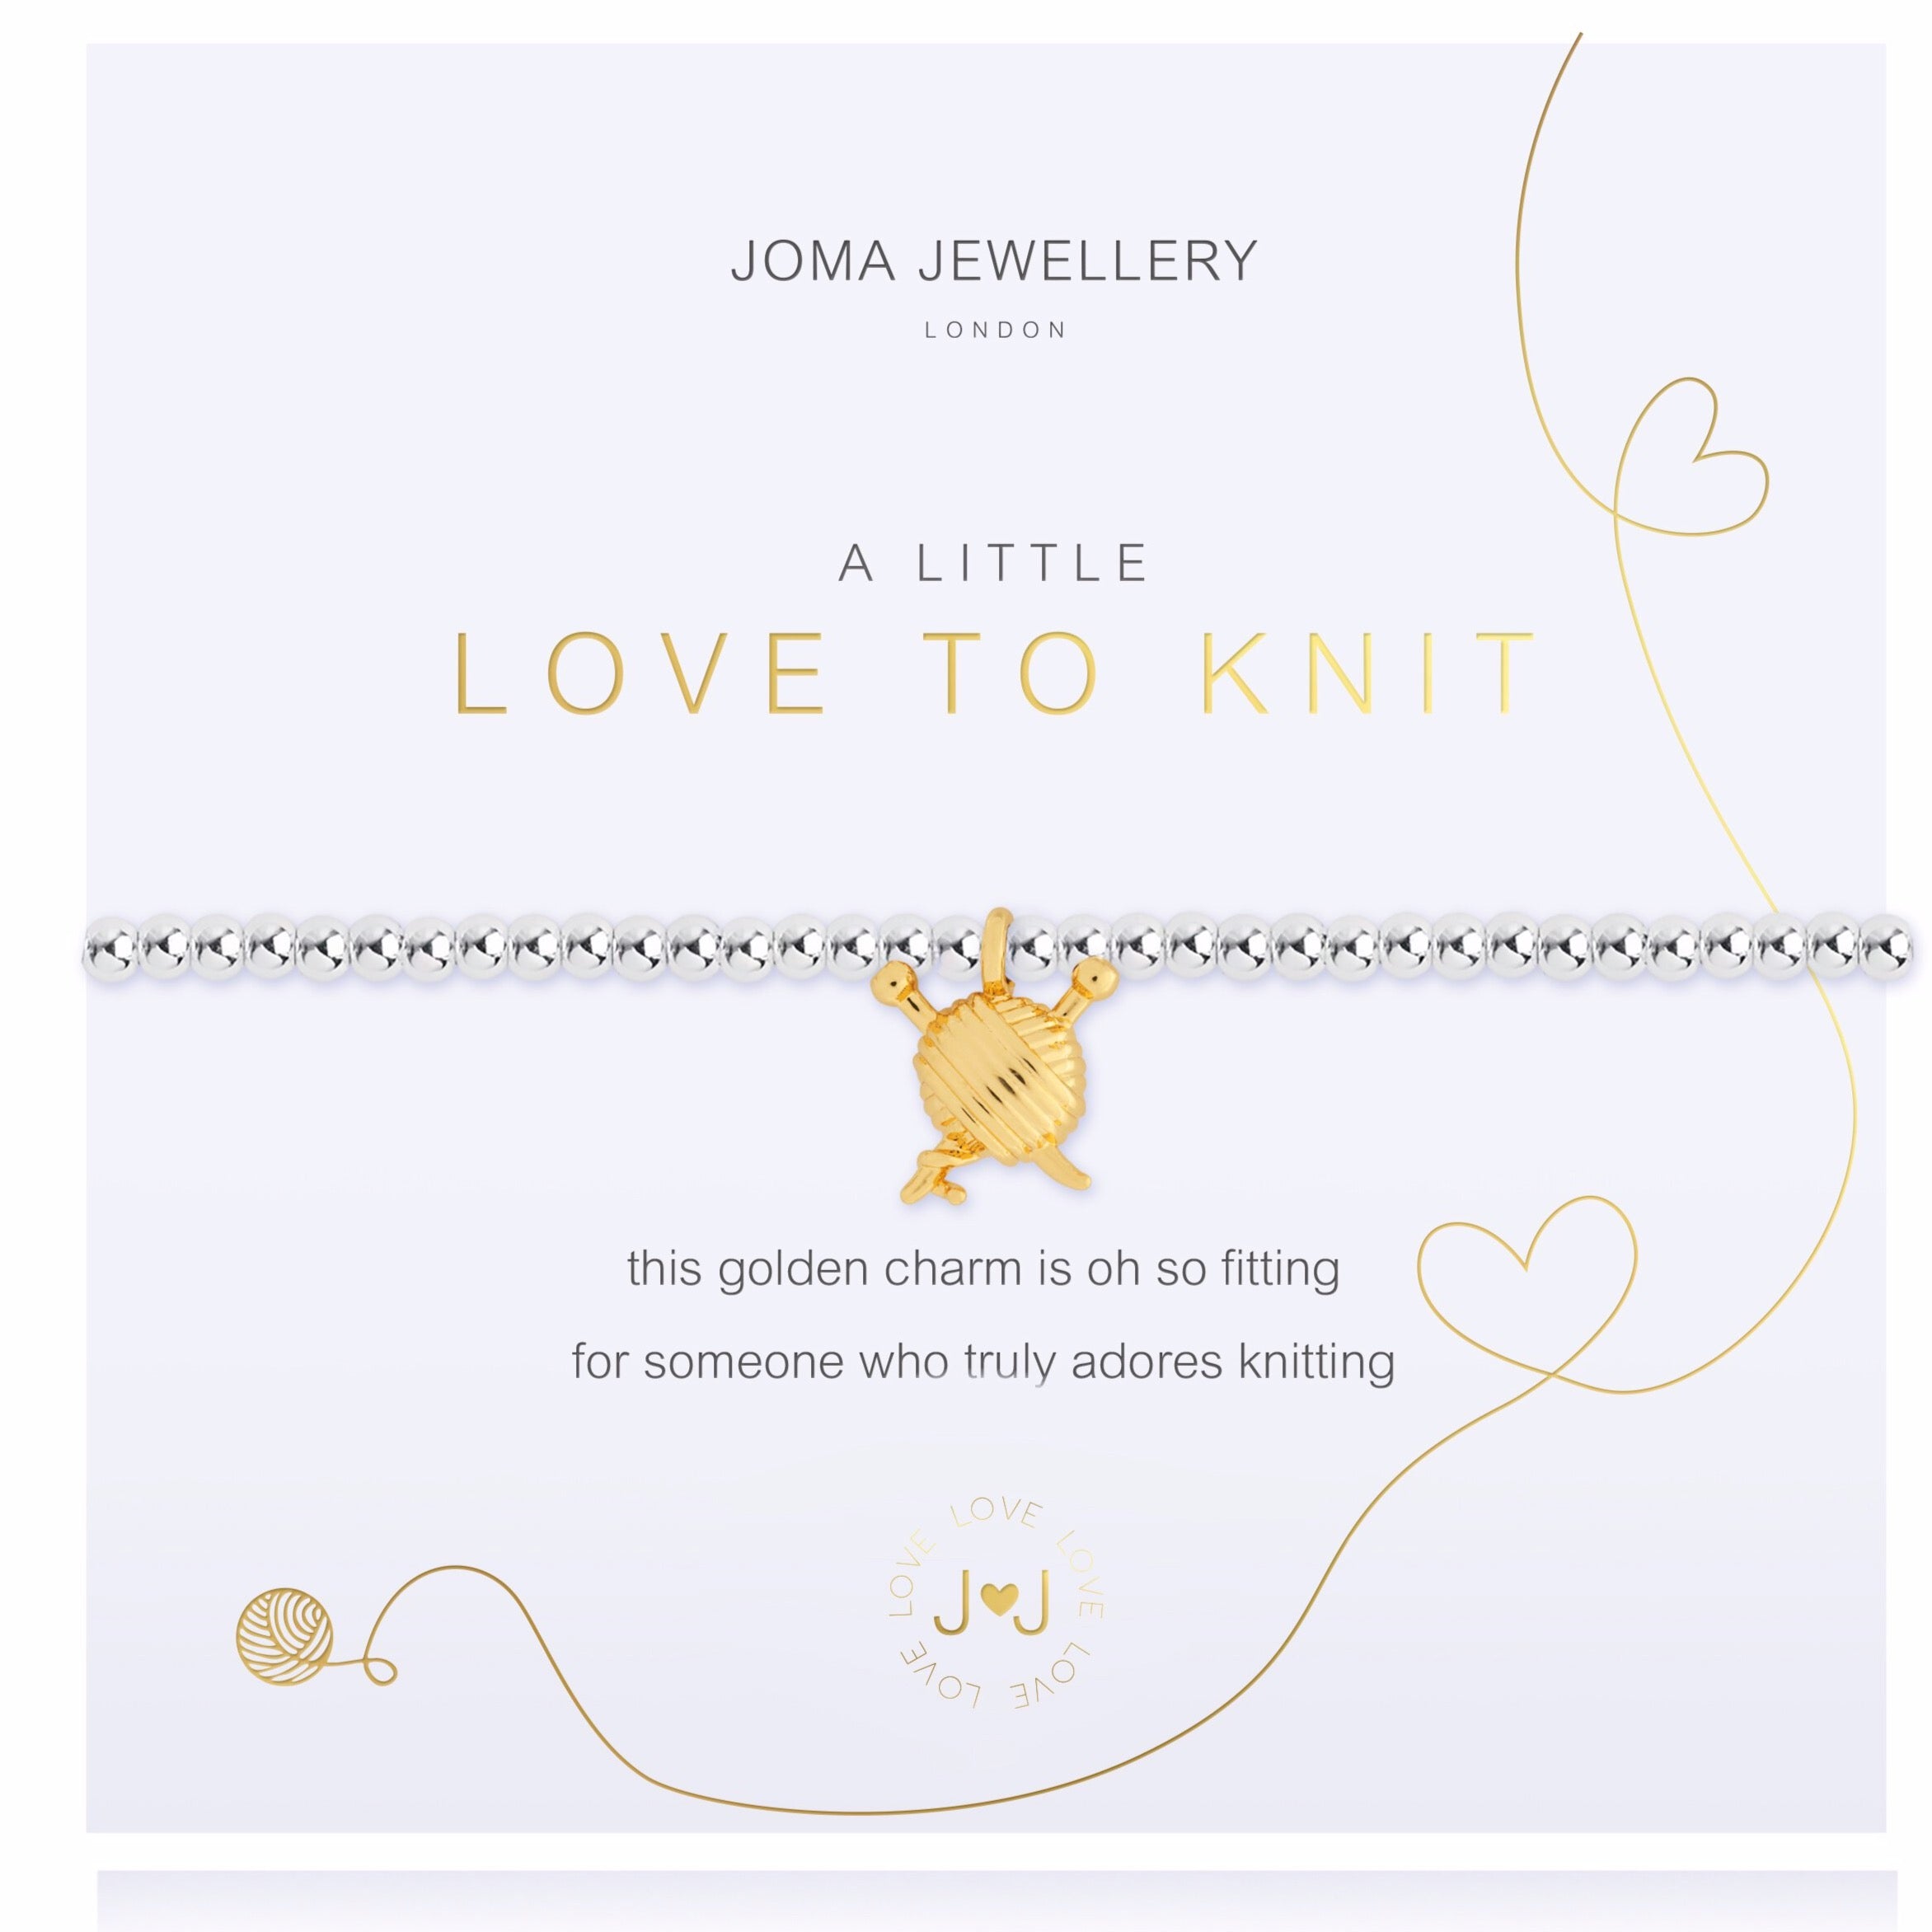 Joma Jewellery A Little Love To Knit Bracelet |More Than Just A Gift